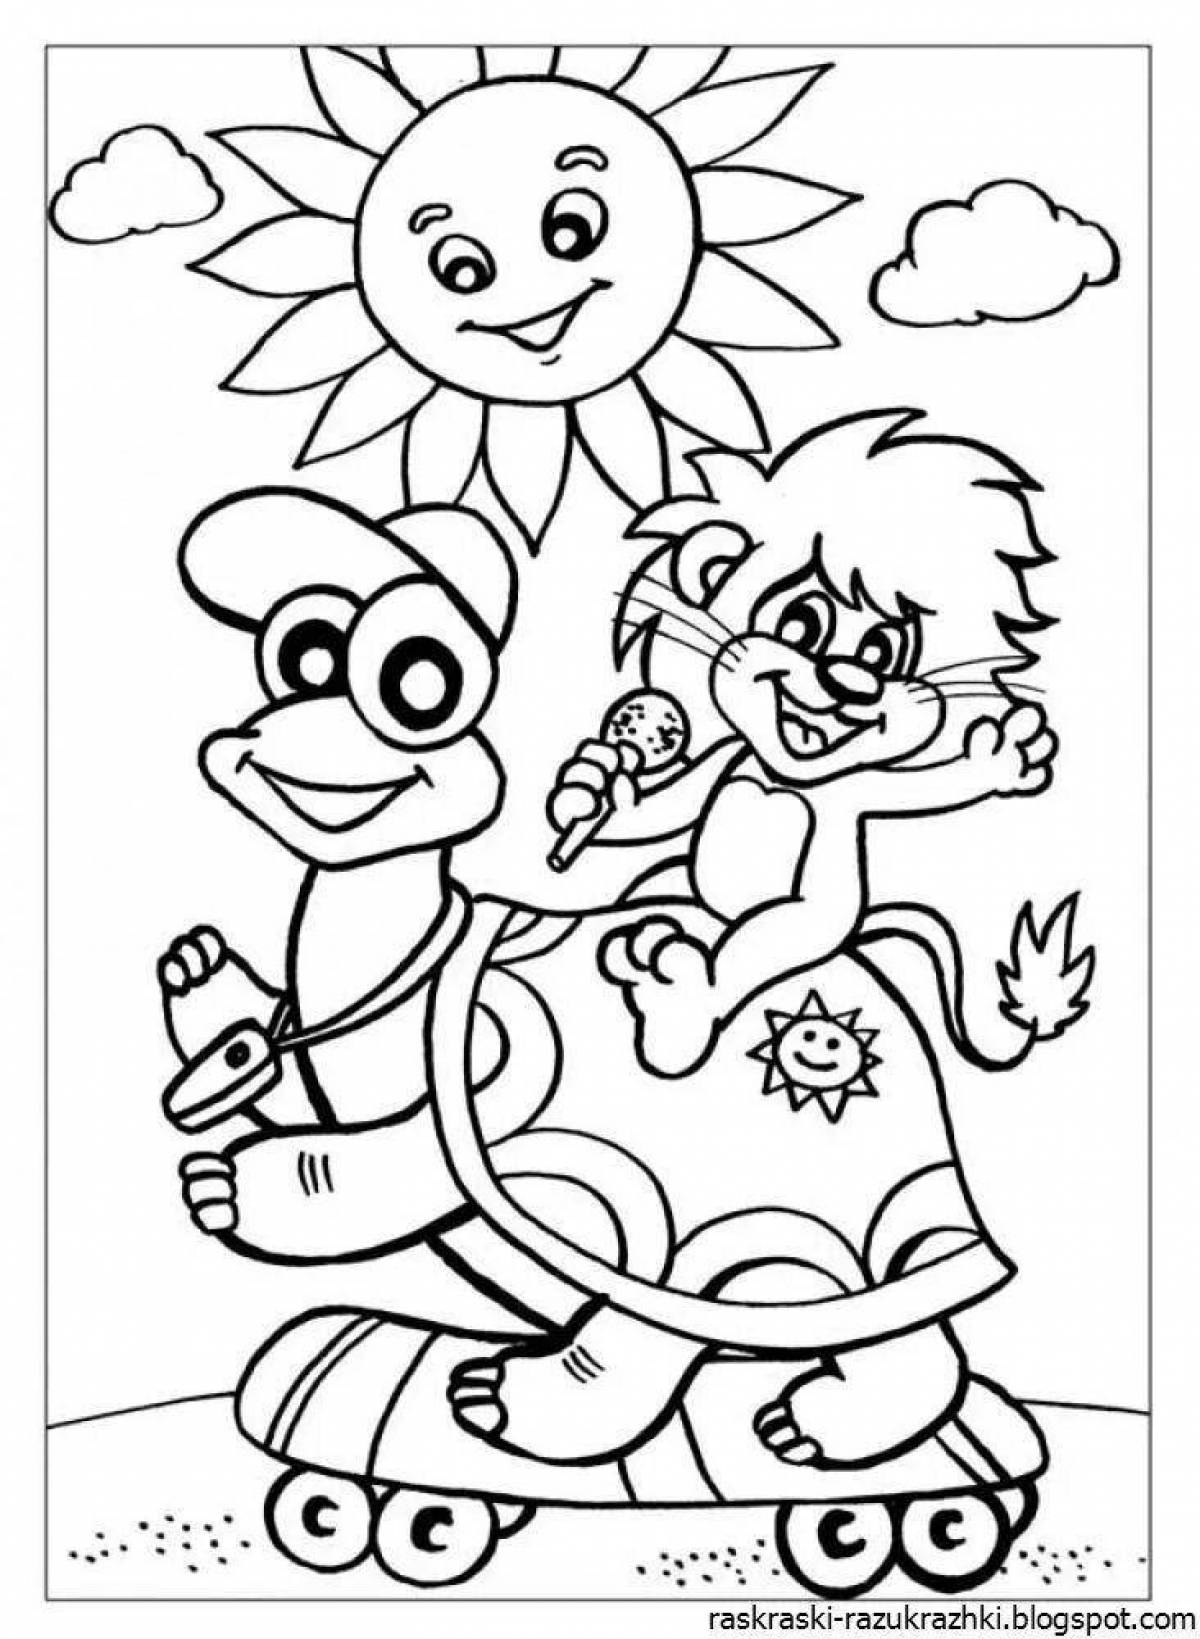 Crazy cartoon coloring book for 6-7 year olds